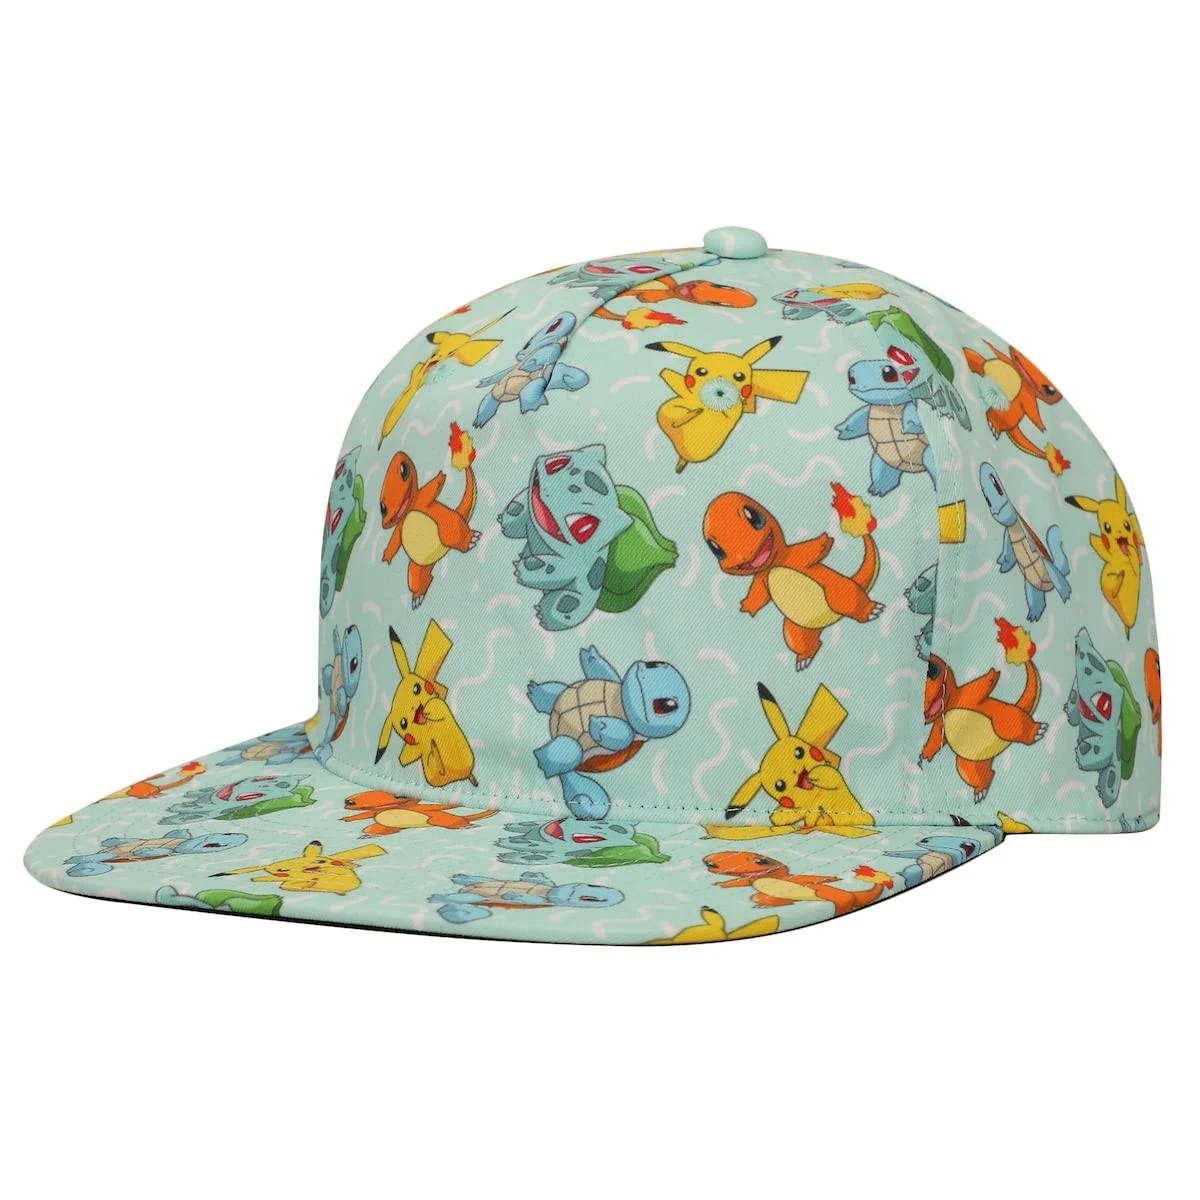 Pokemon All-Over Character Snapback Hat for Sun Protection | Image